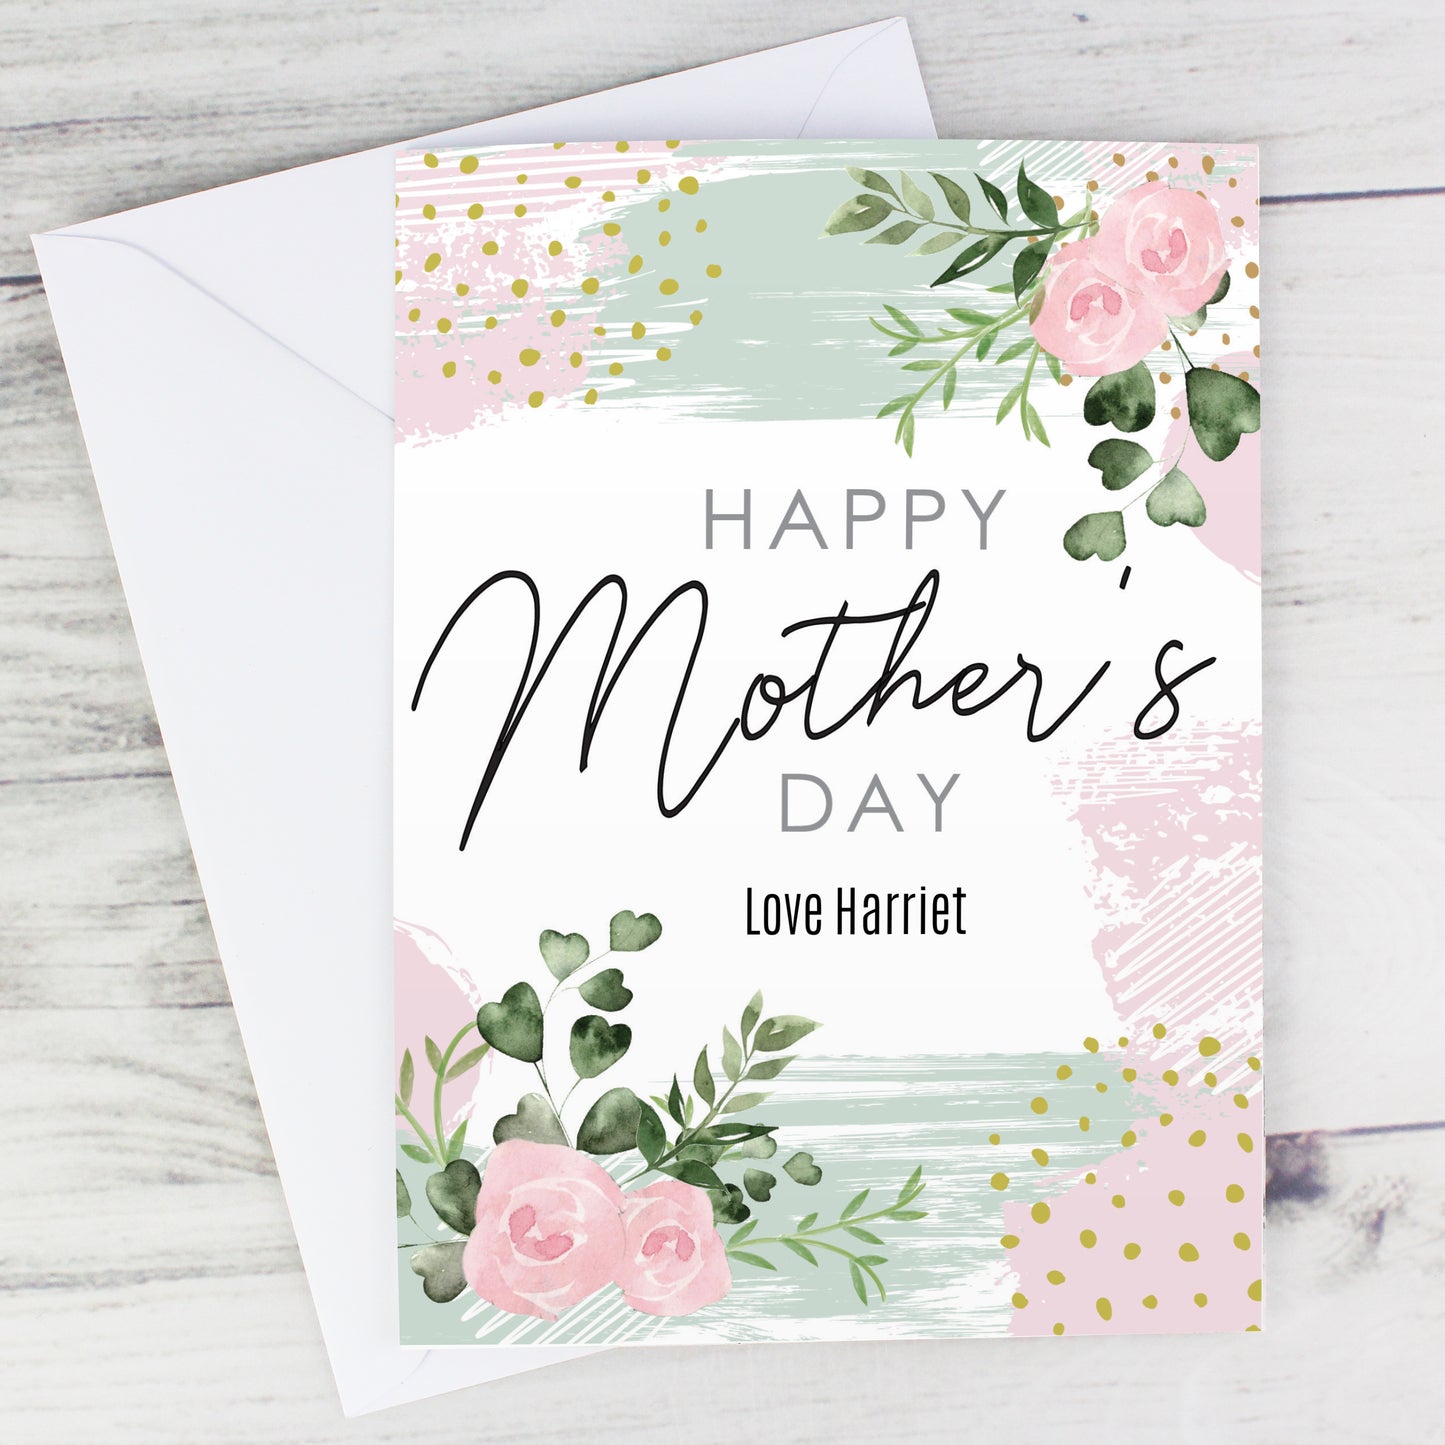 Personalised Abstract Rose Mother's Day Card